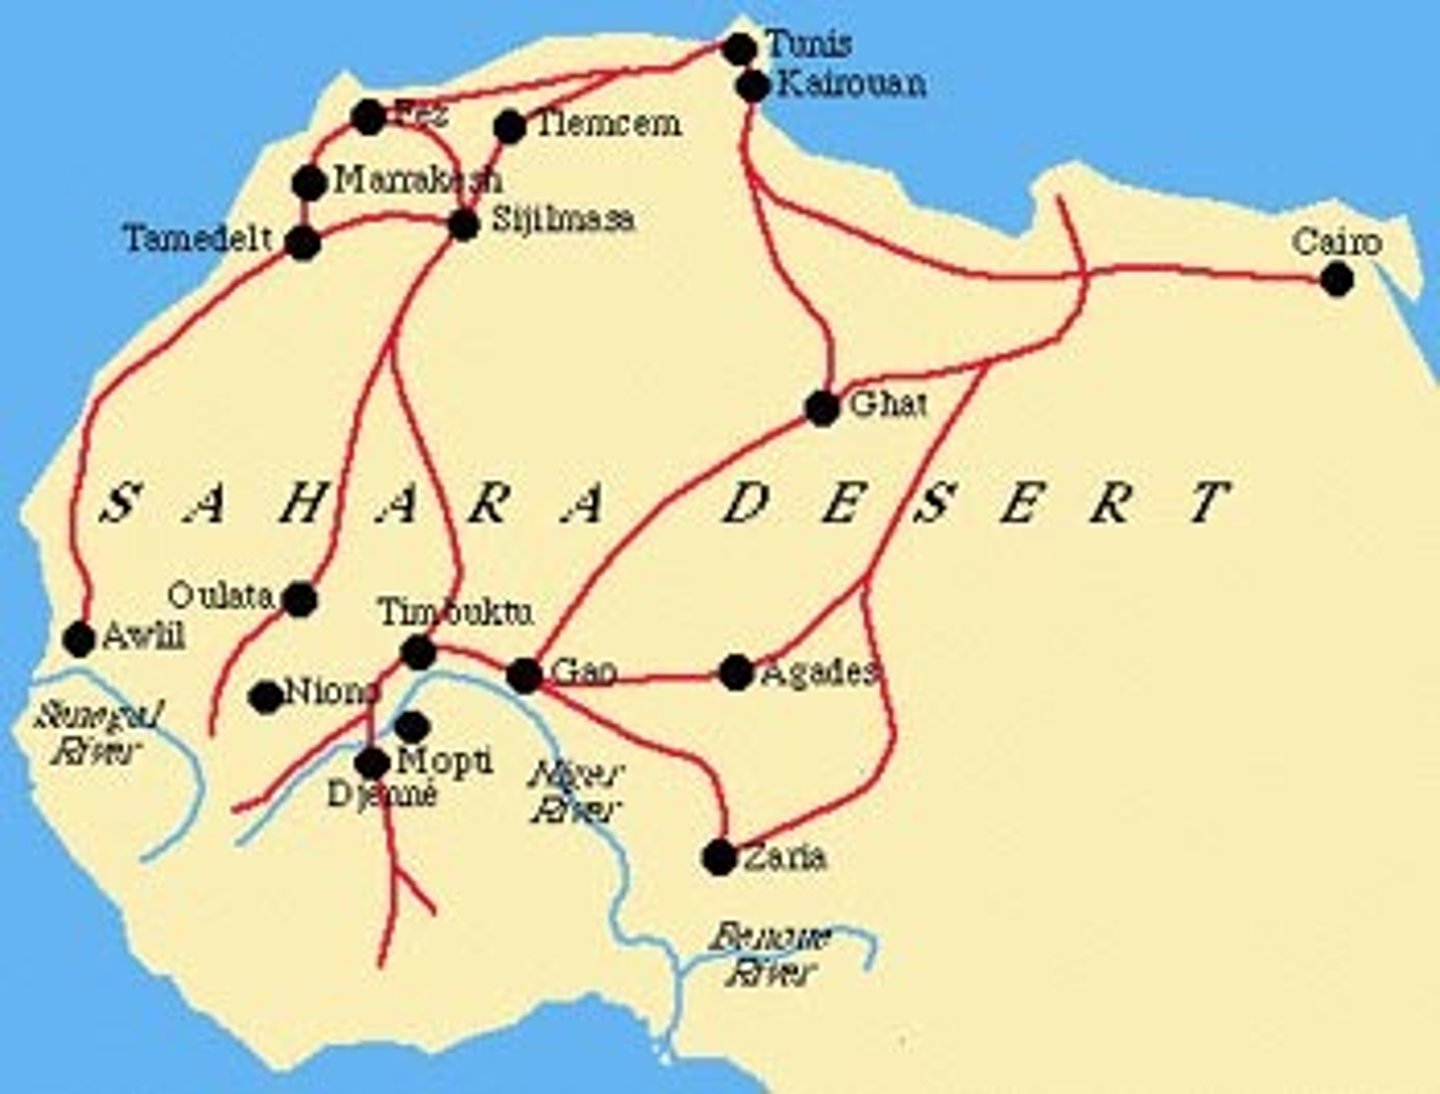 <p>route across the sahara desert. Major trade route that traded for gold and salt, created caravan routes, economic benefit for controlling dessert, camels played a huge role in the trading</p>